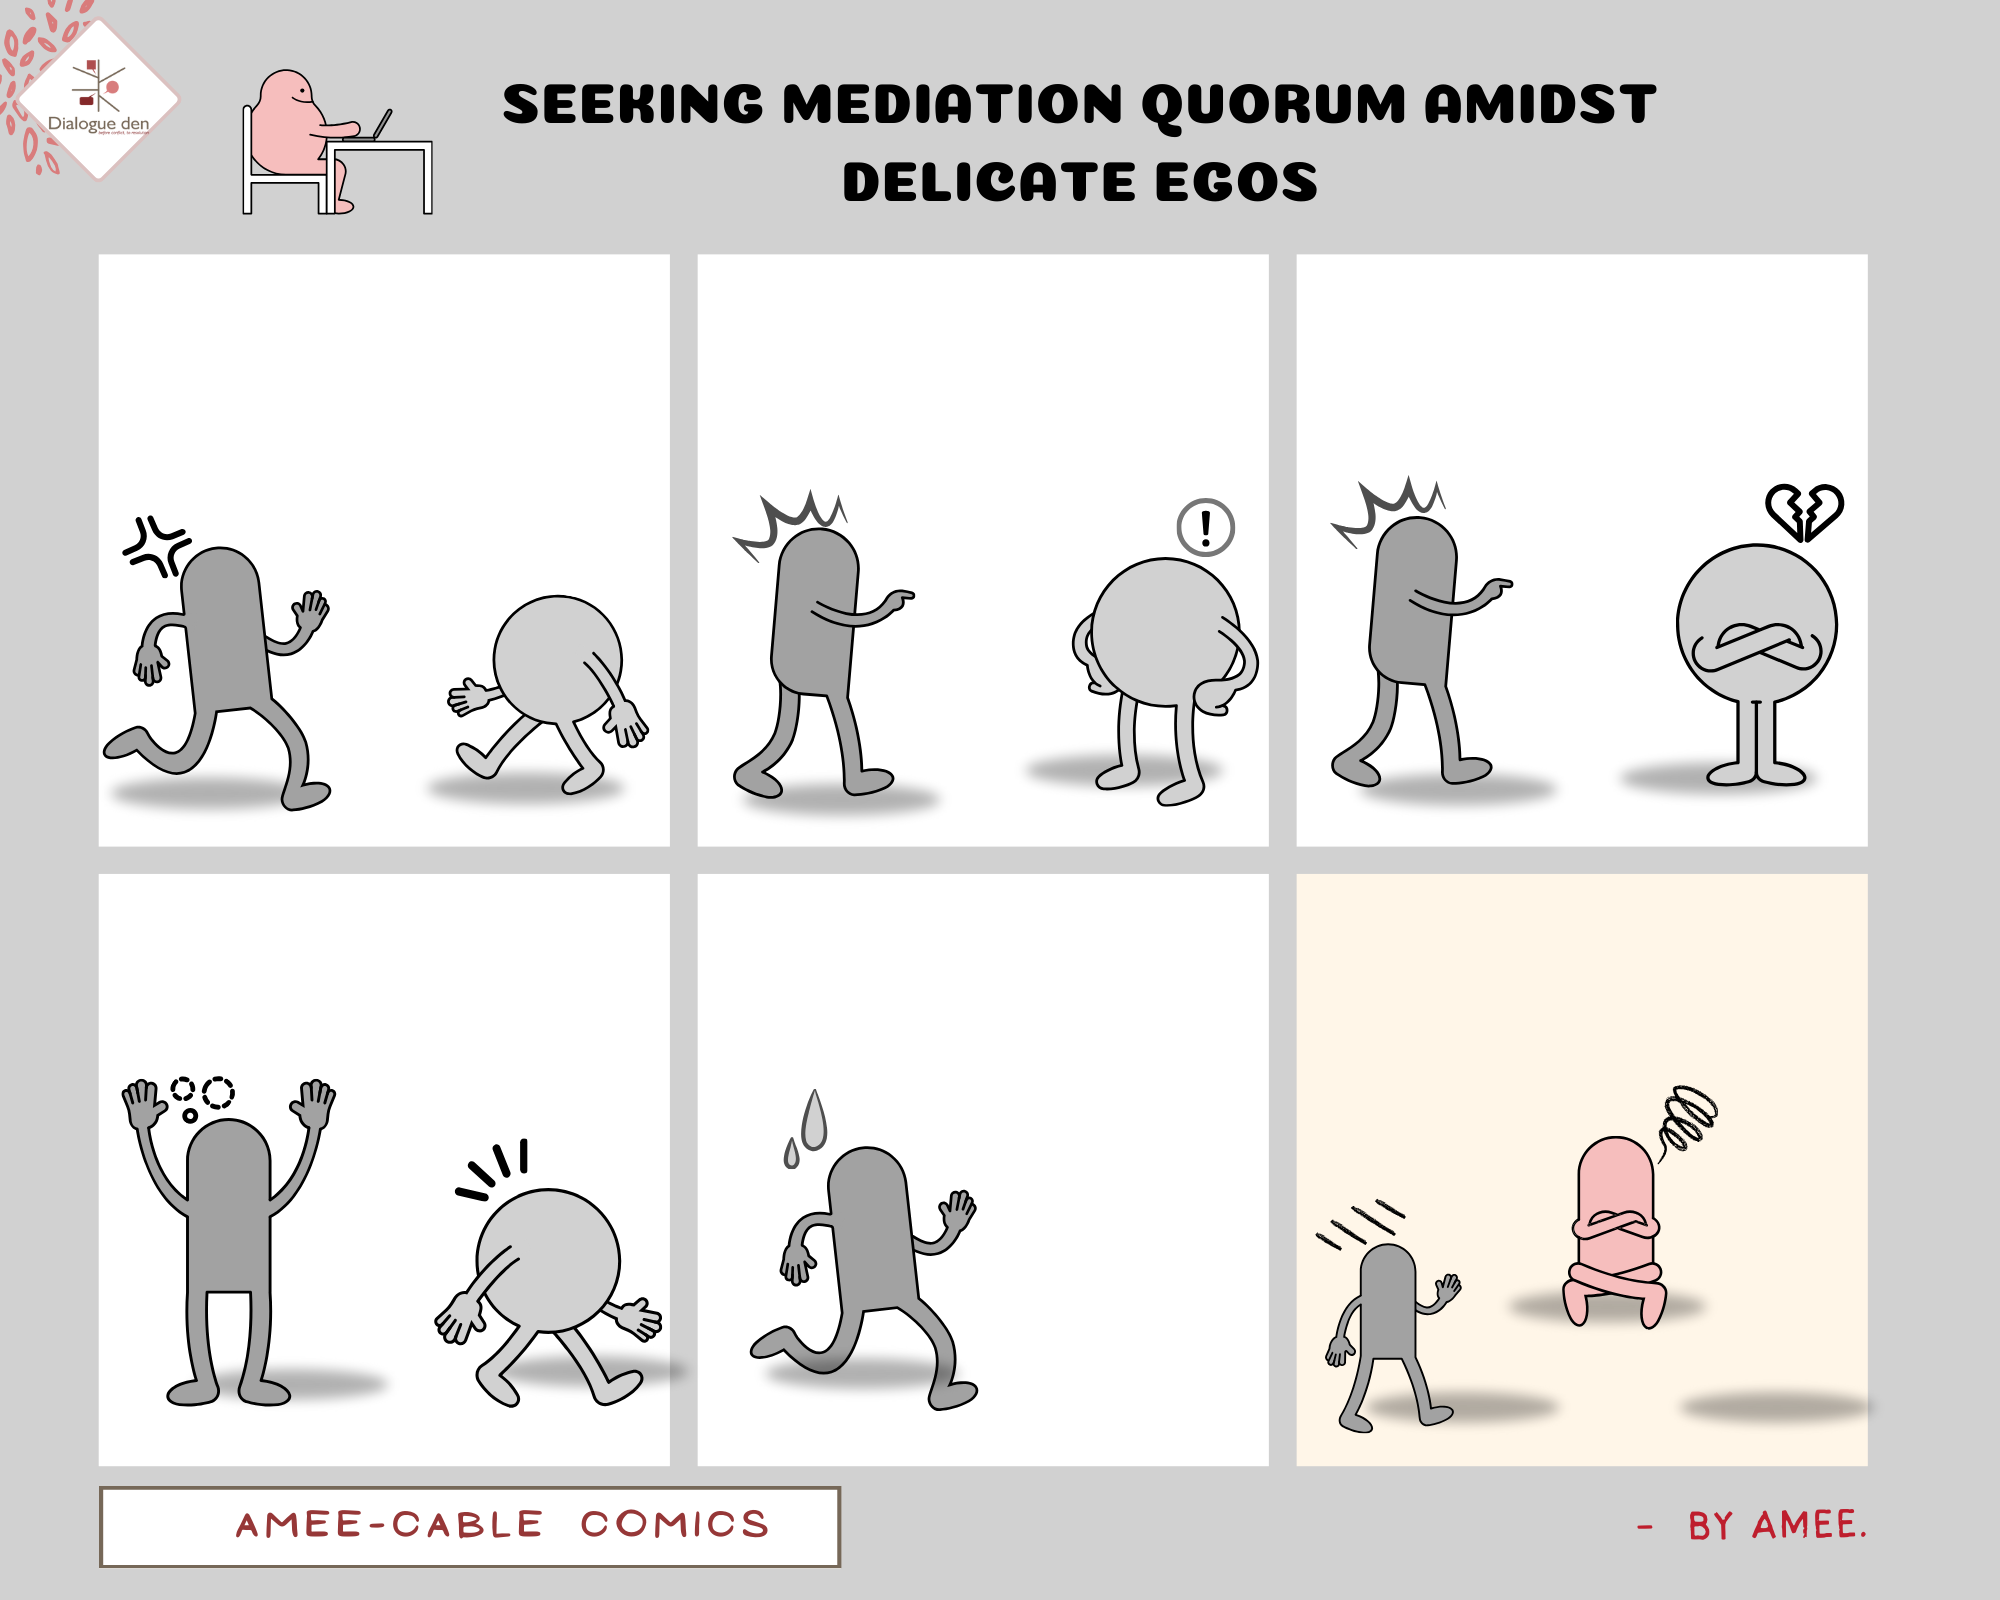 Amee-Cable Comic #10. Seeking Mediation Quorum Amidst Delicate Egos